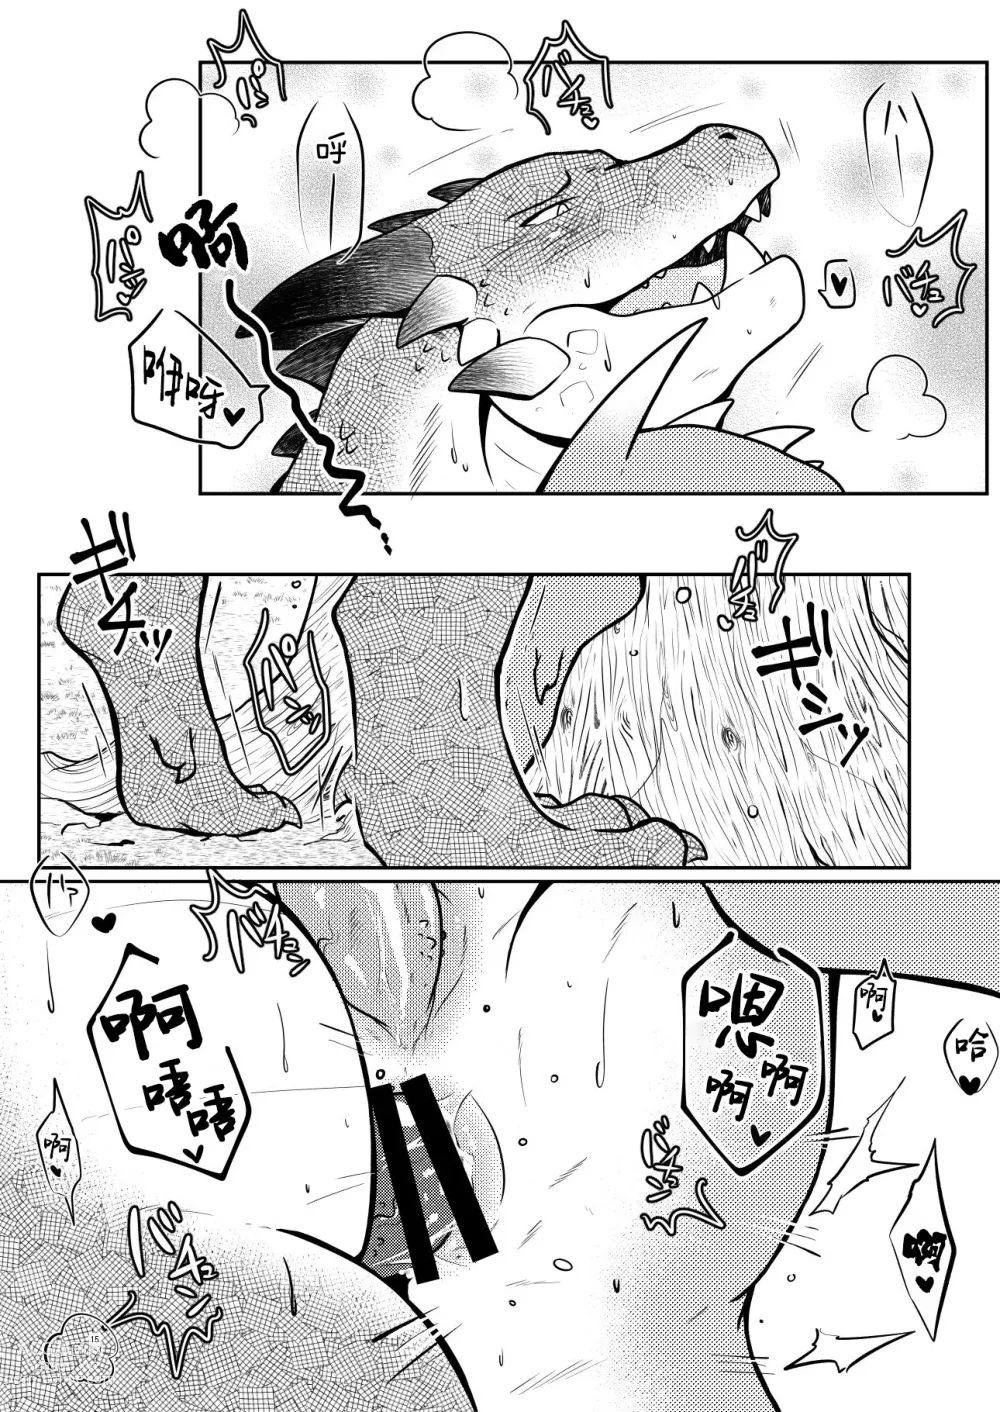 Page 15 of doujinshi 砰砰砰心乱跳